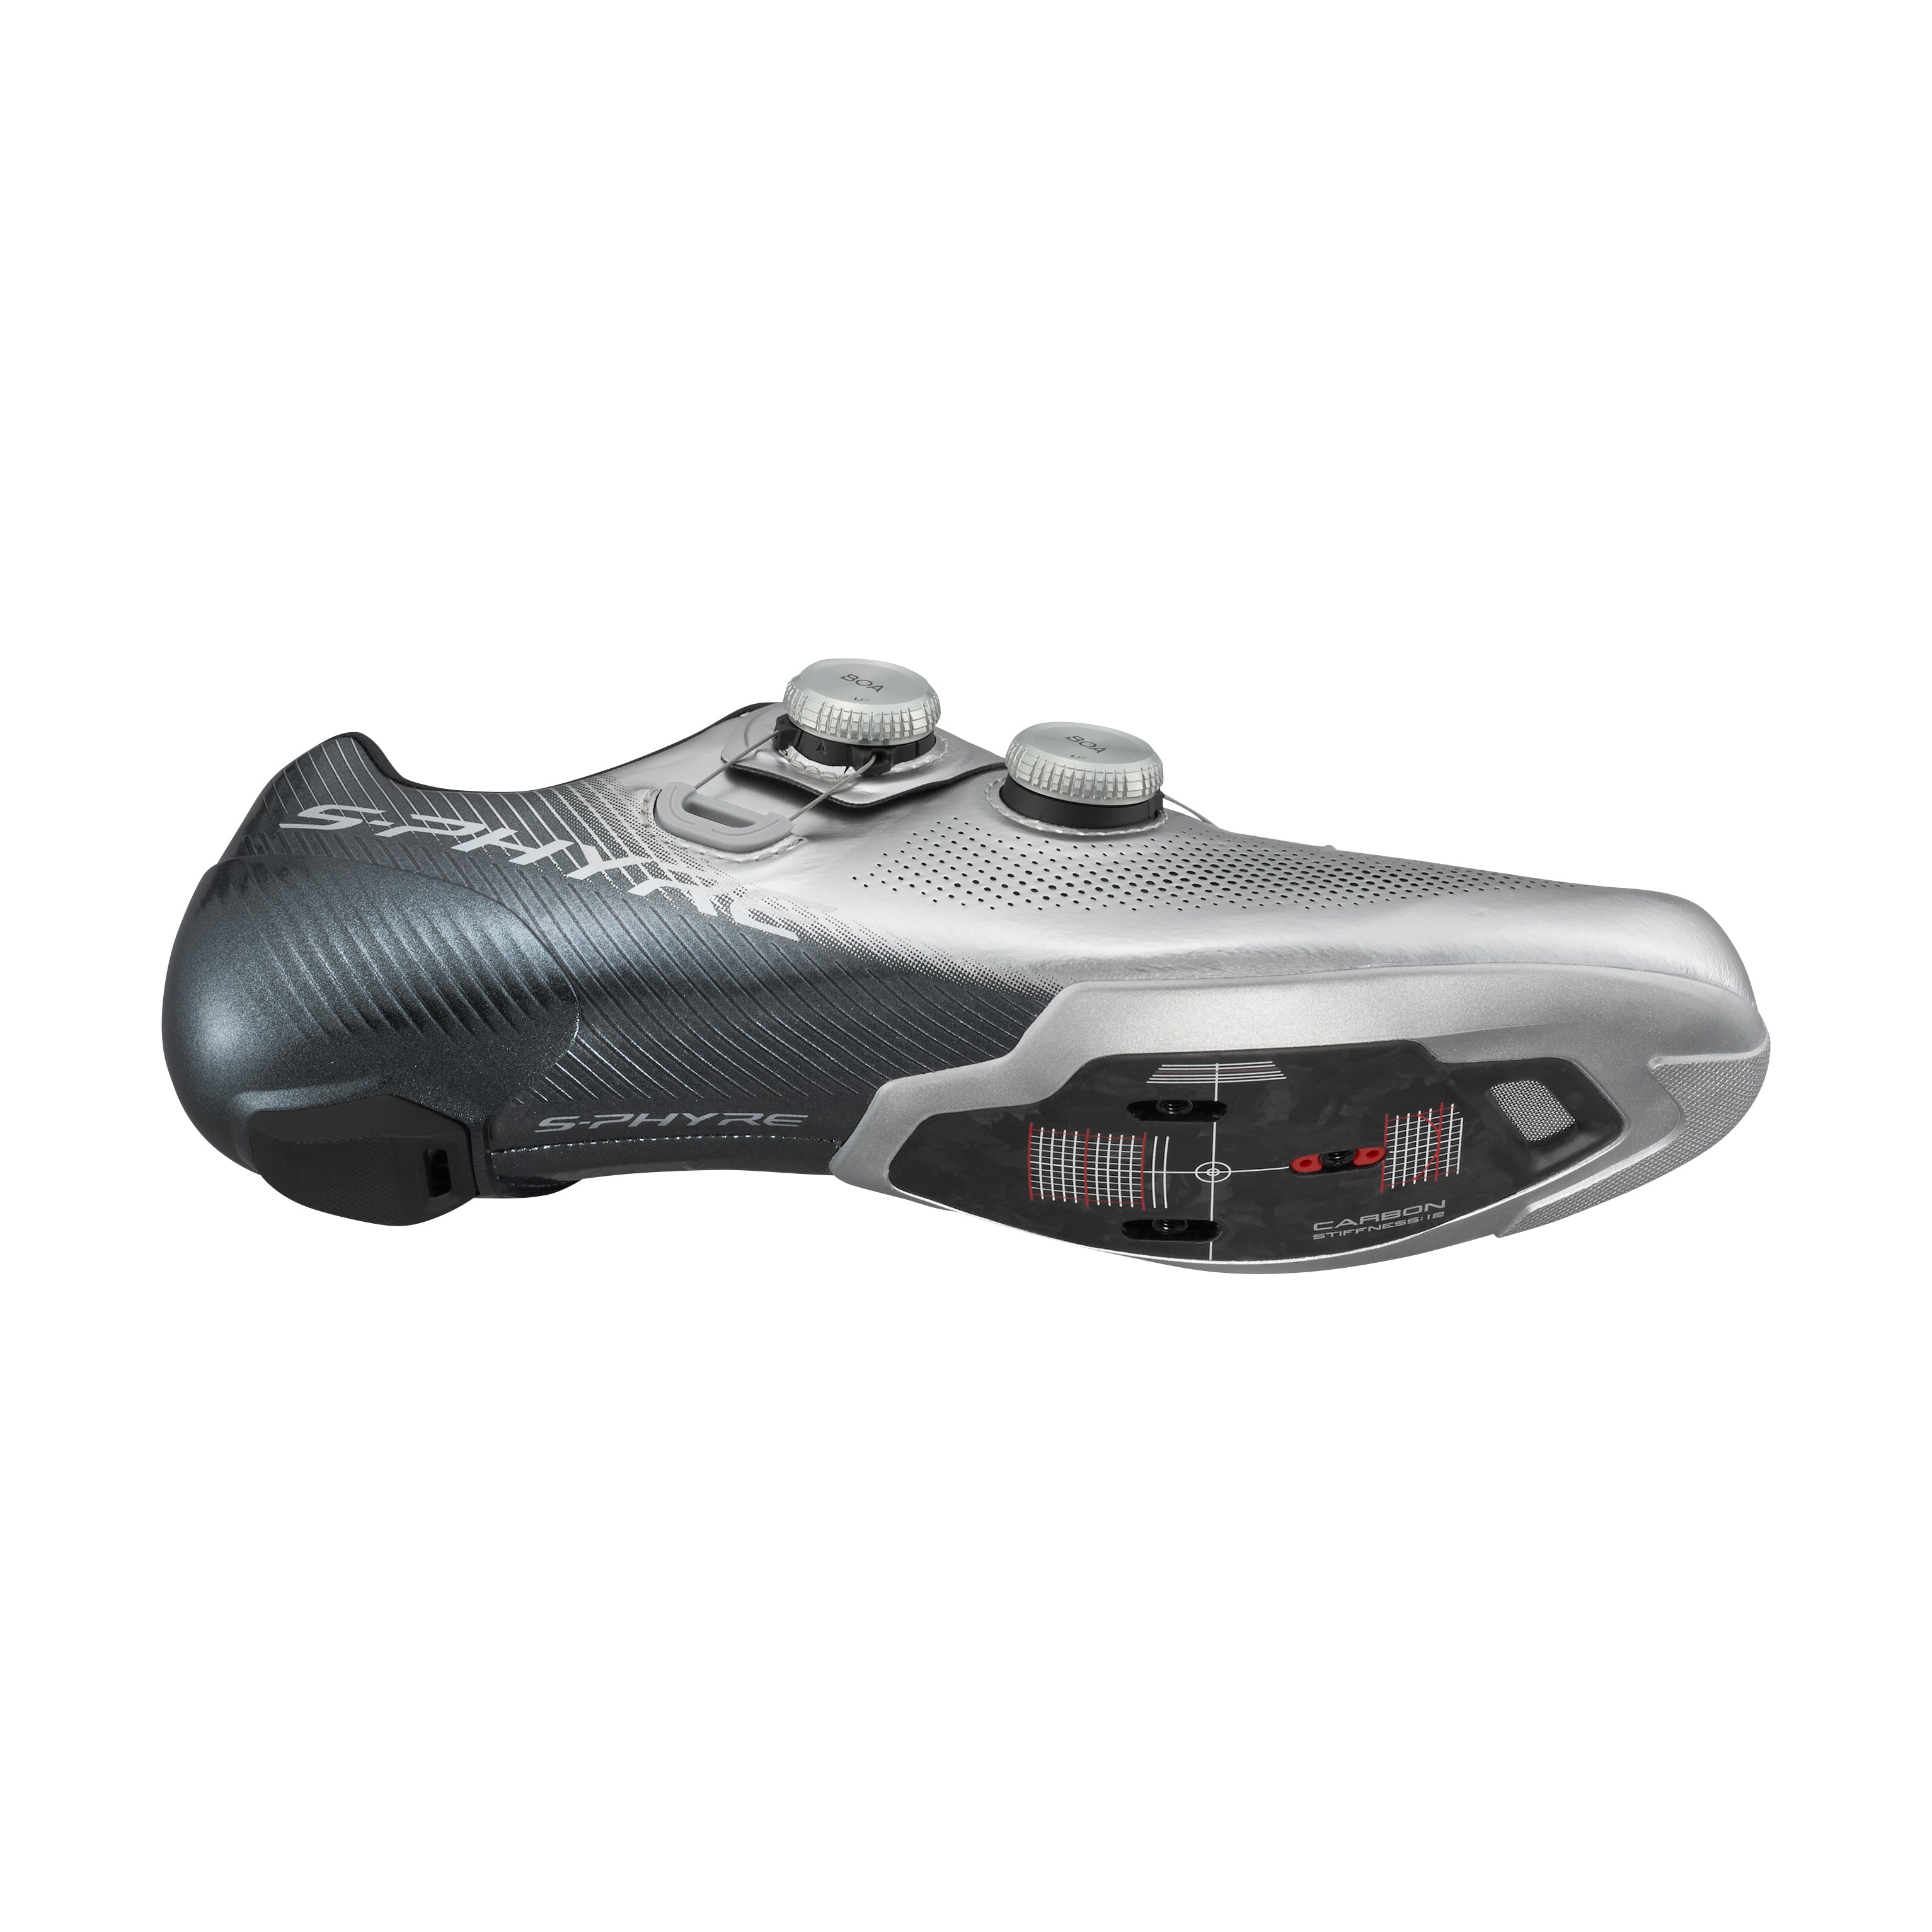 SHIMANO SH-RC903S S-PHYRE road shoes-wide silver-black special edition/SHIMANO SH-RC903S ROAD SHOES-WIDE-SILVER/BLACK